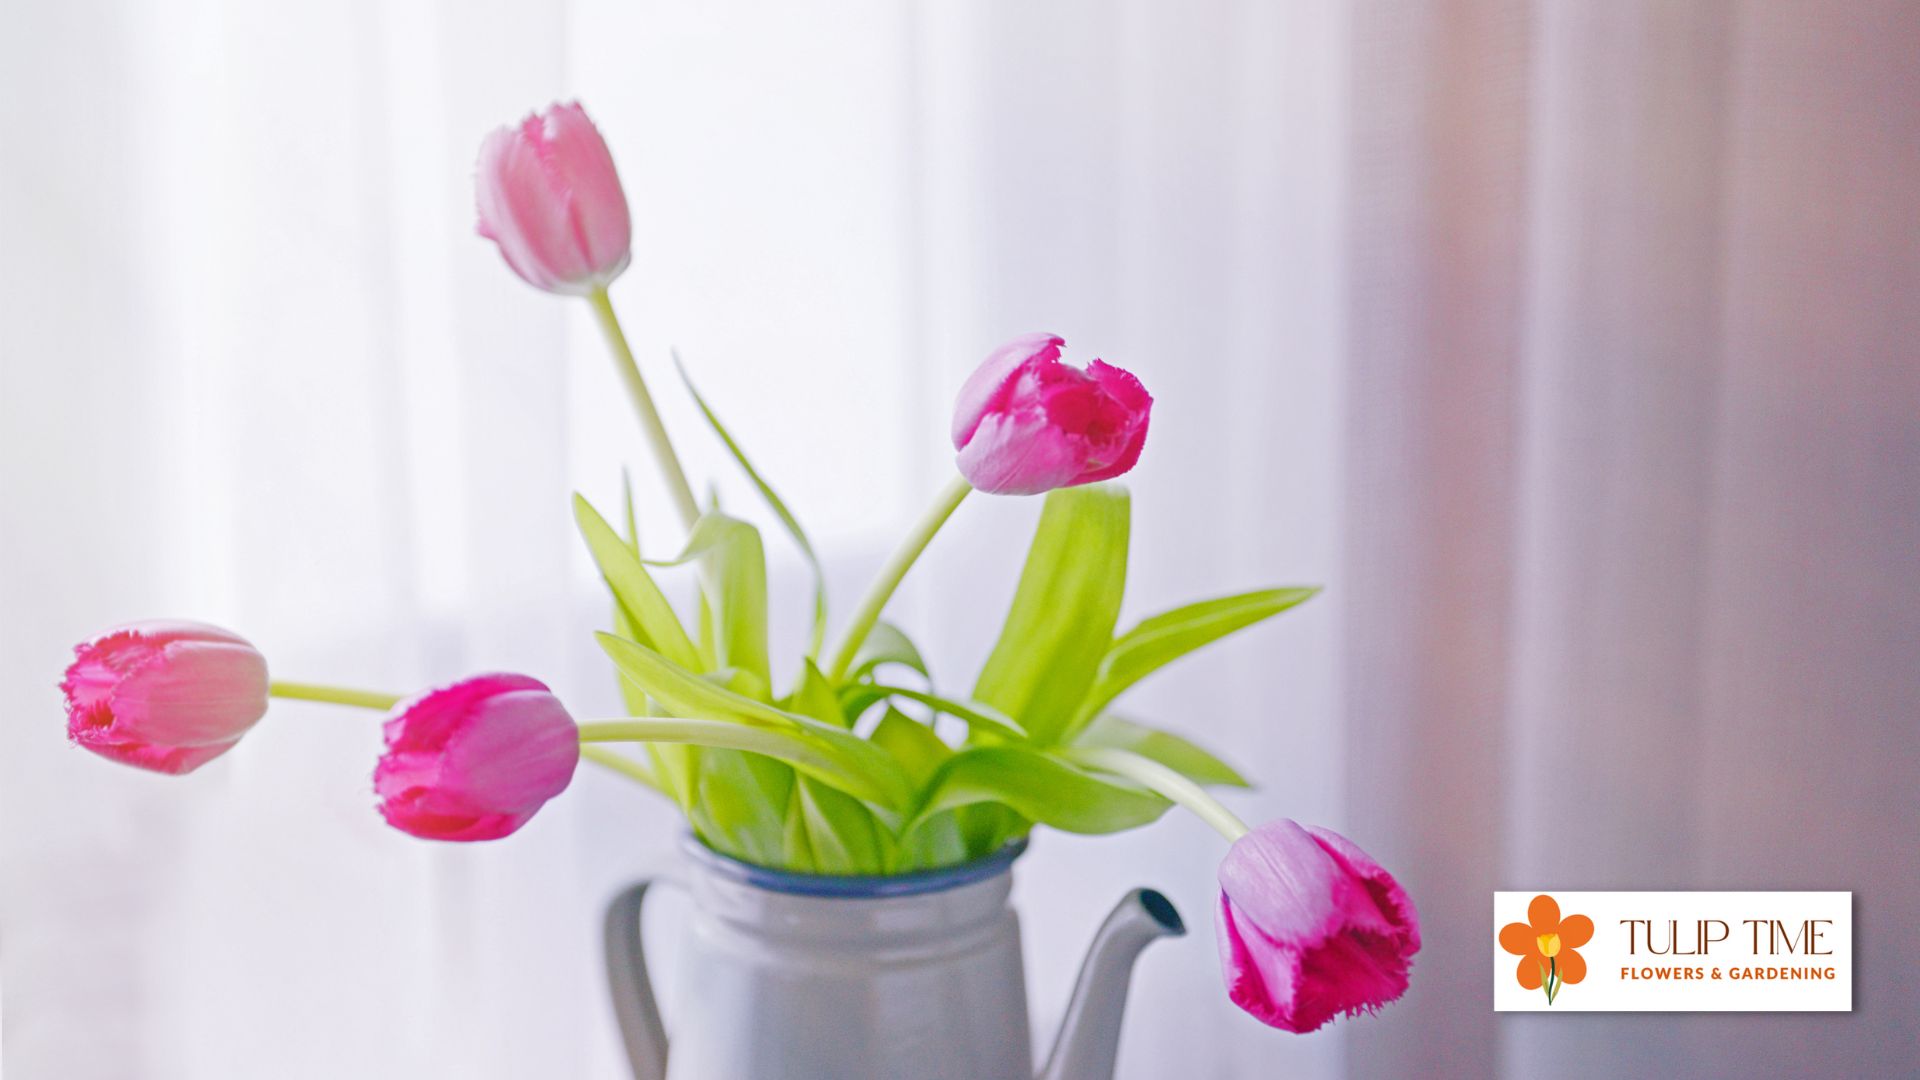 How To Care For Hydroponic Tulips